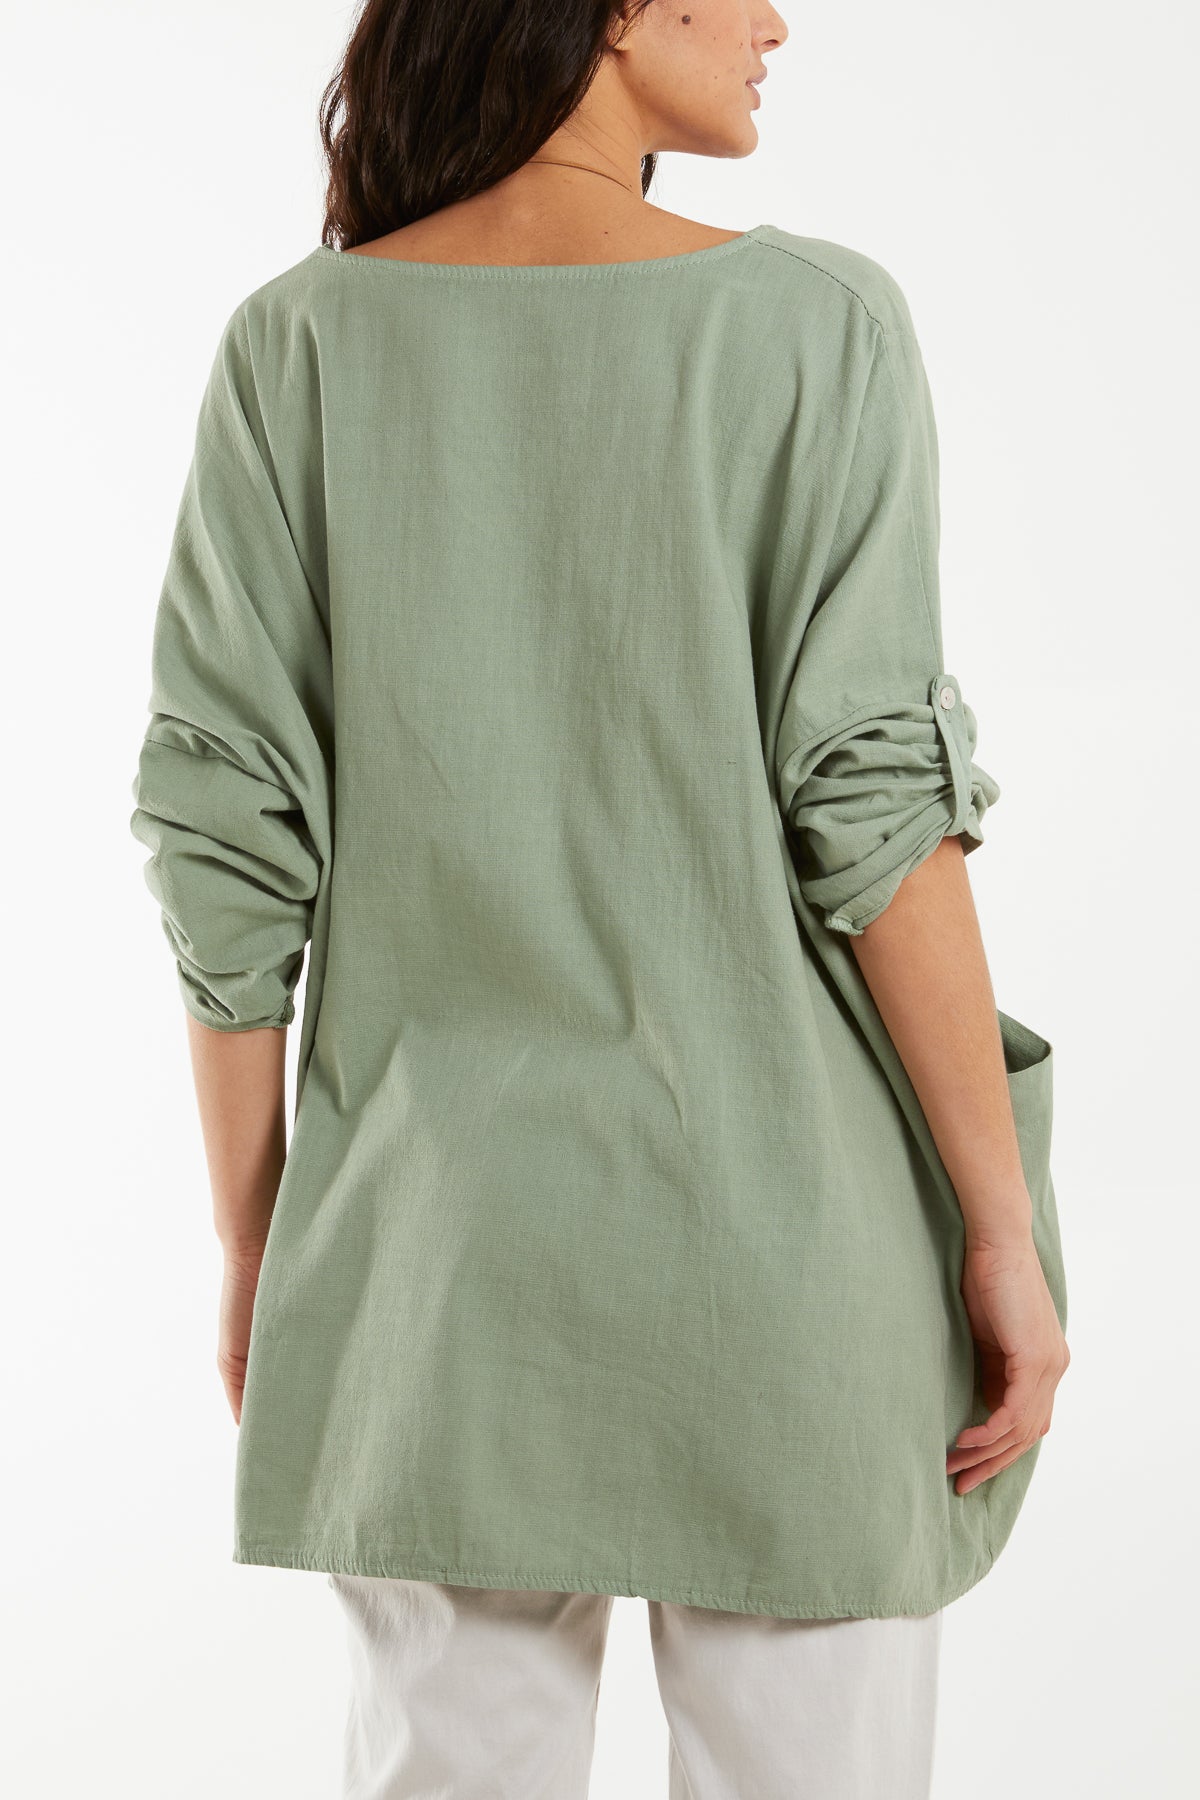 Necklace Relaxed Fit Blouse with Pockets